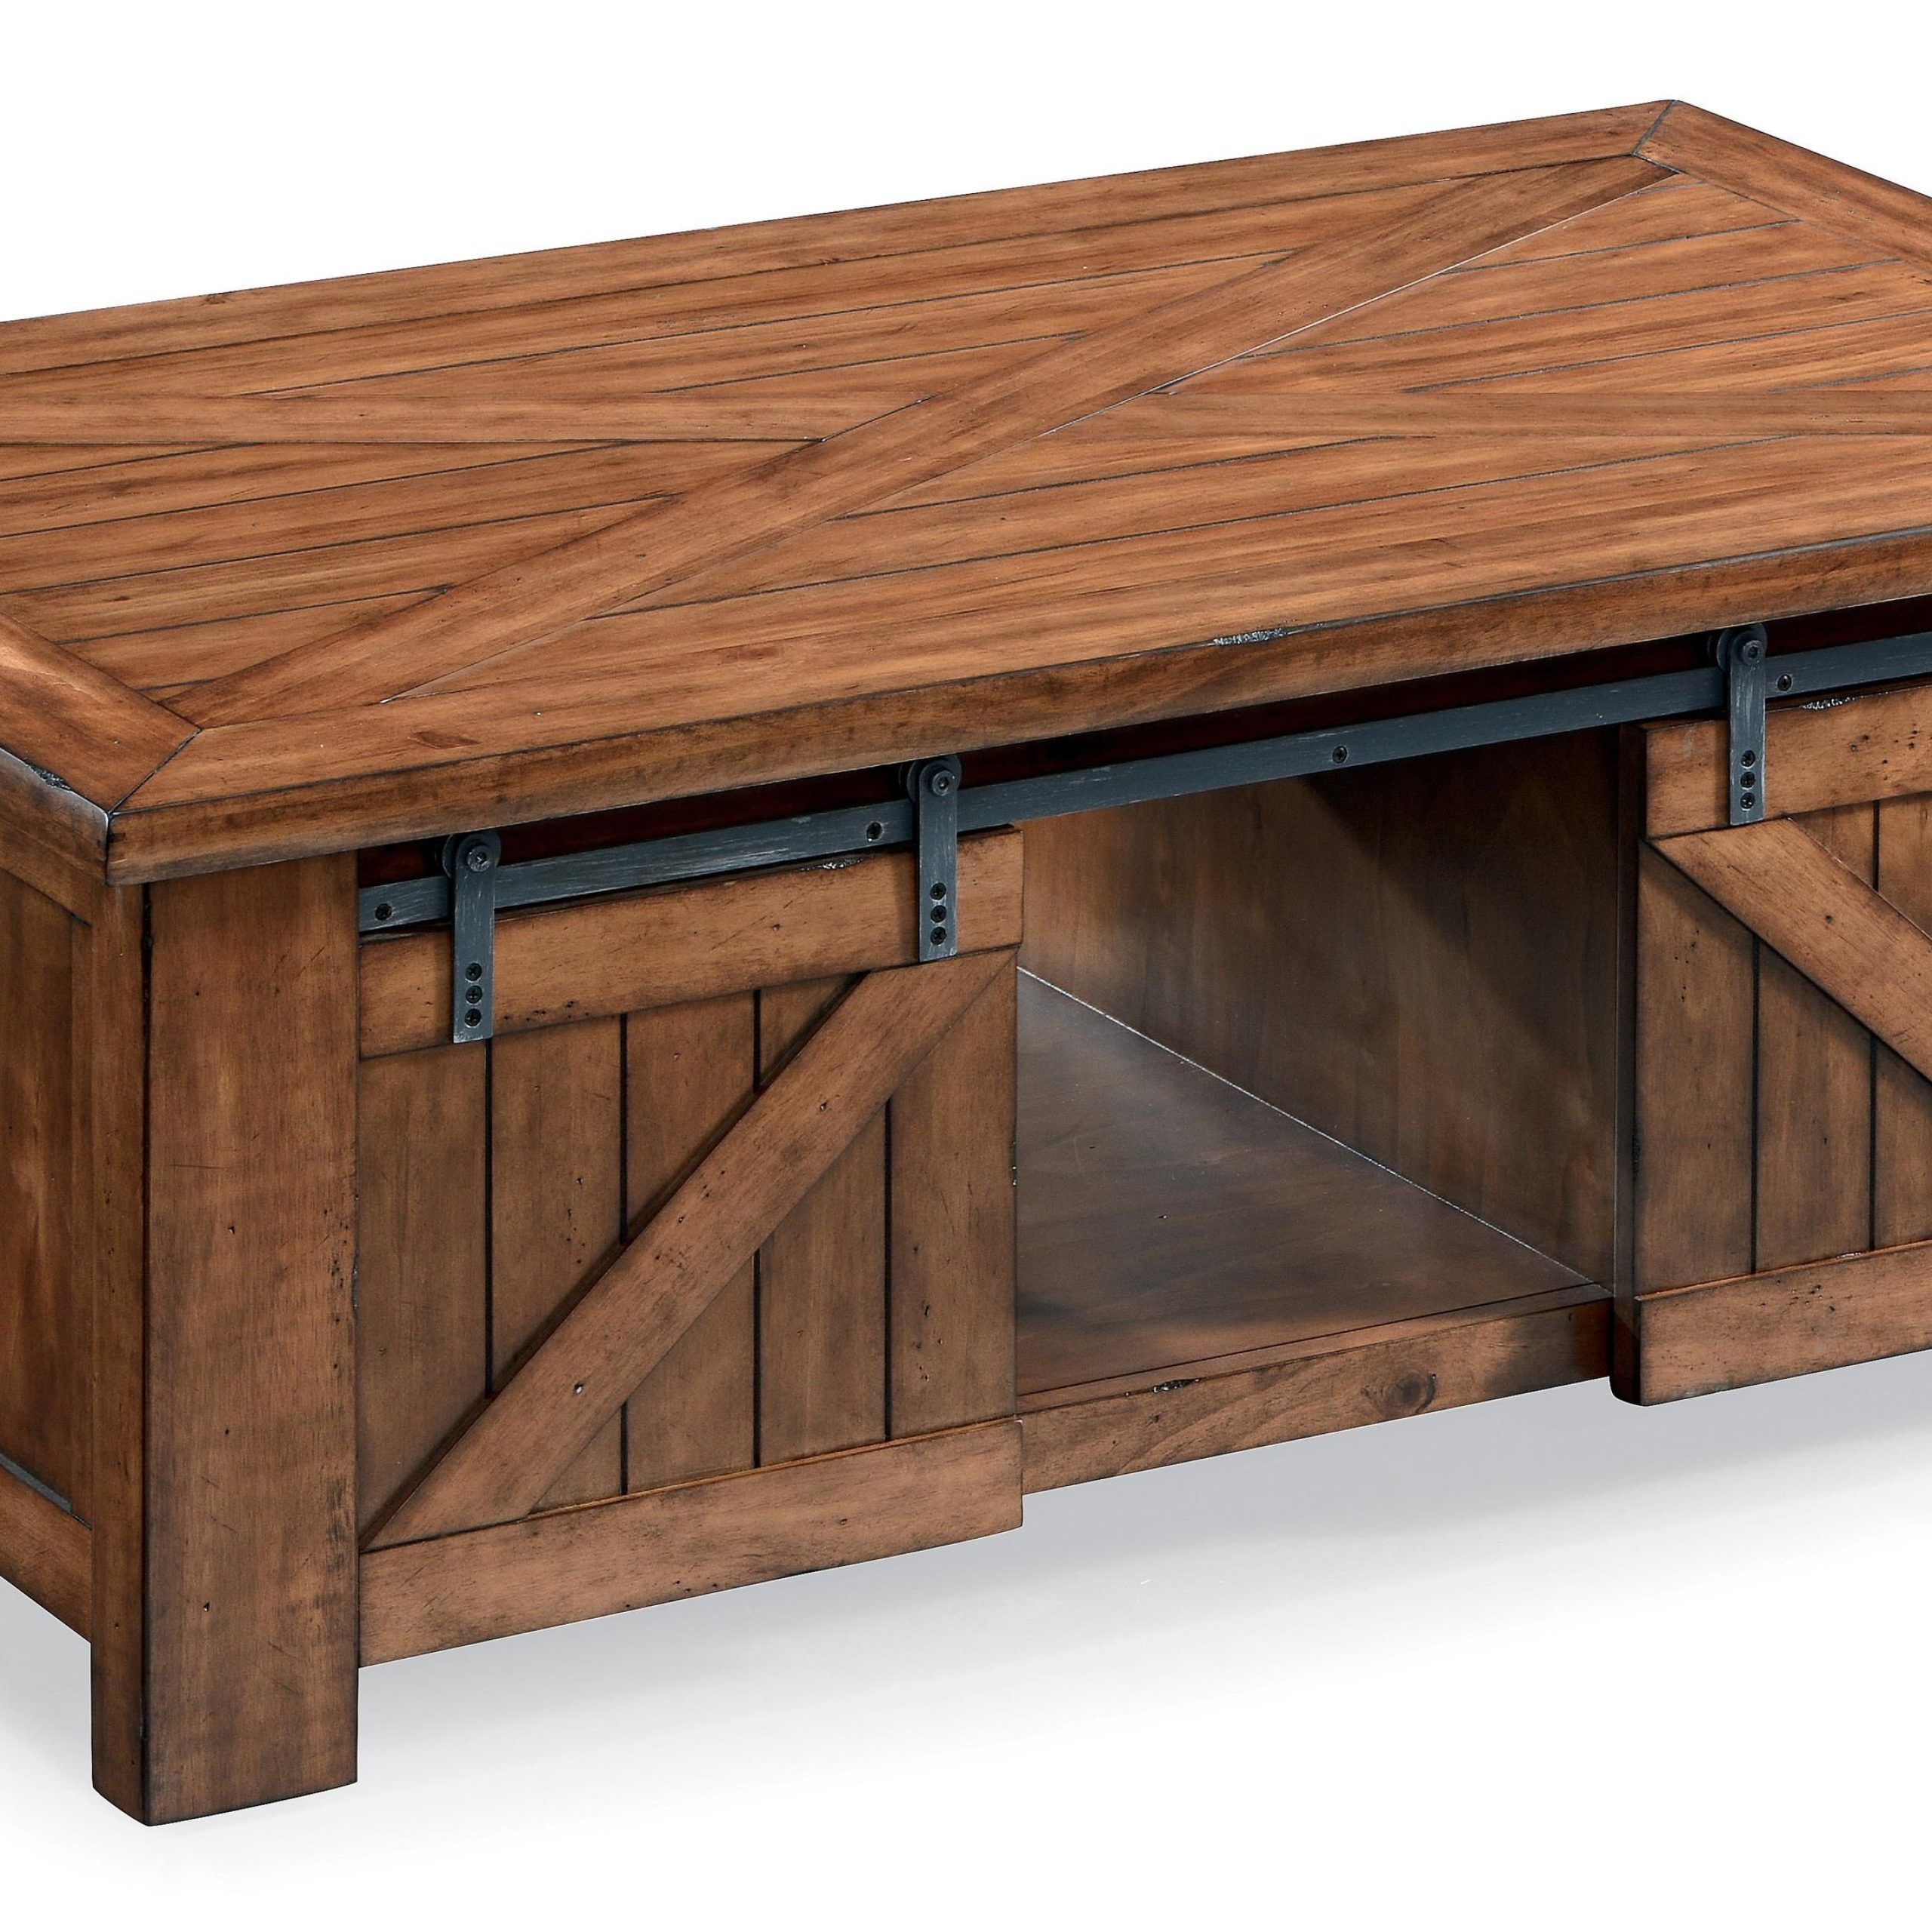 Harper Farm Country Industrial Rectangular Lift Top Cocktail Table With For Coffee Tables With Storage And Barn Doors (View 10 of 15)